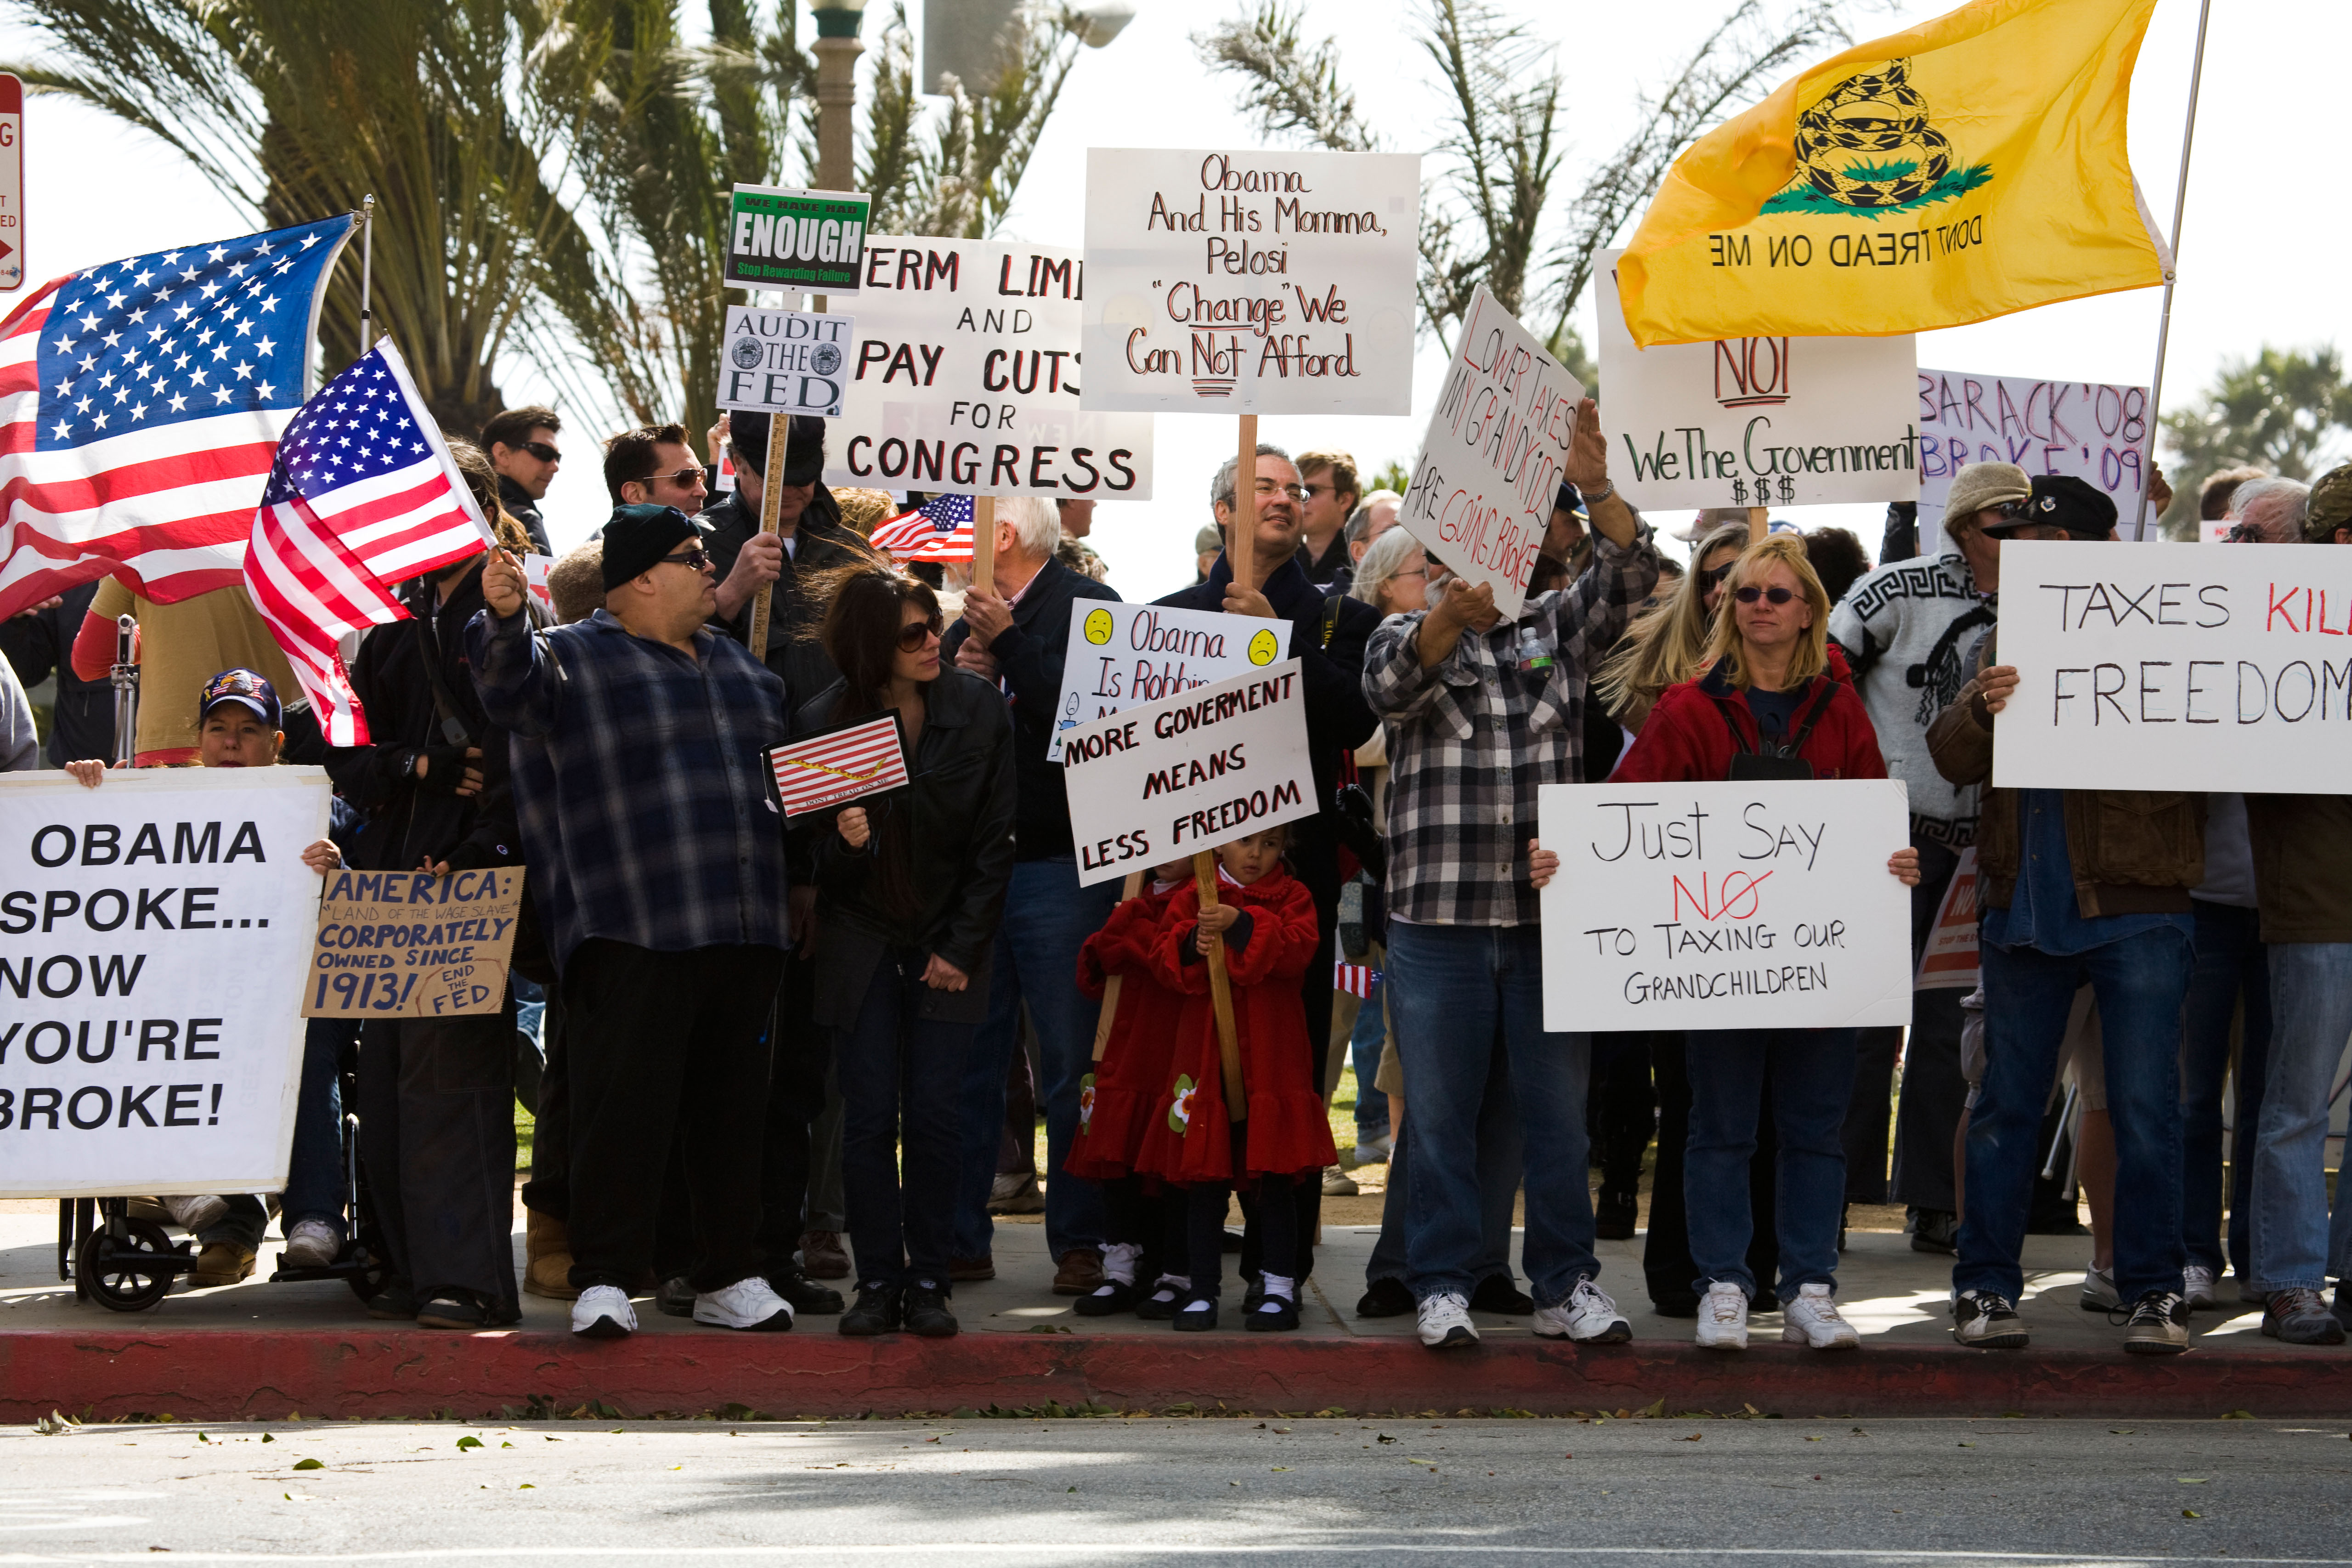 A group of far-right protestors holding protest signs regarding taxes